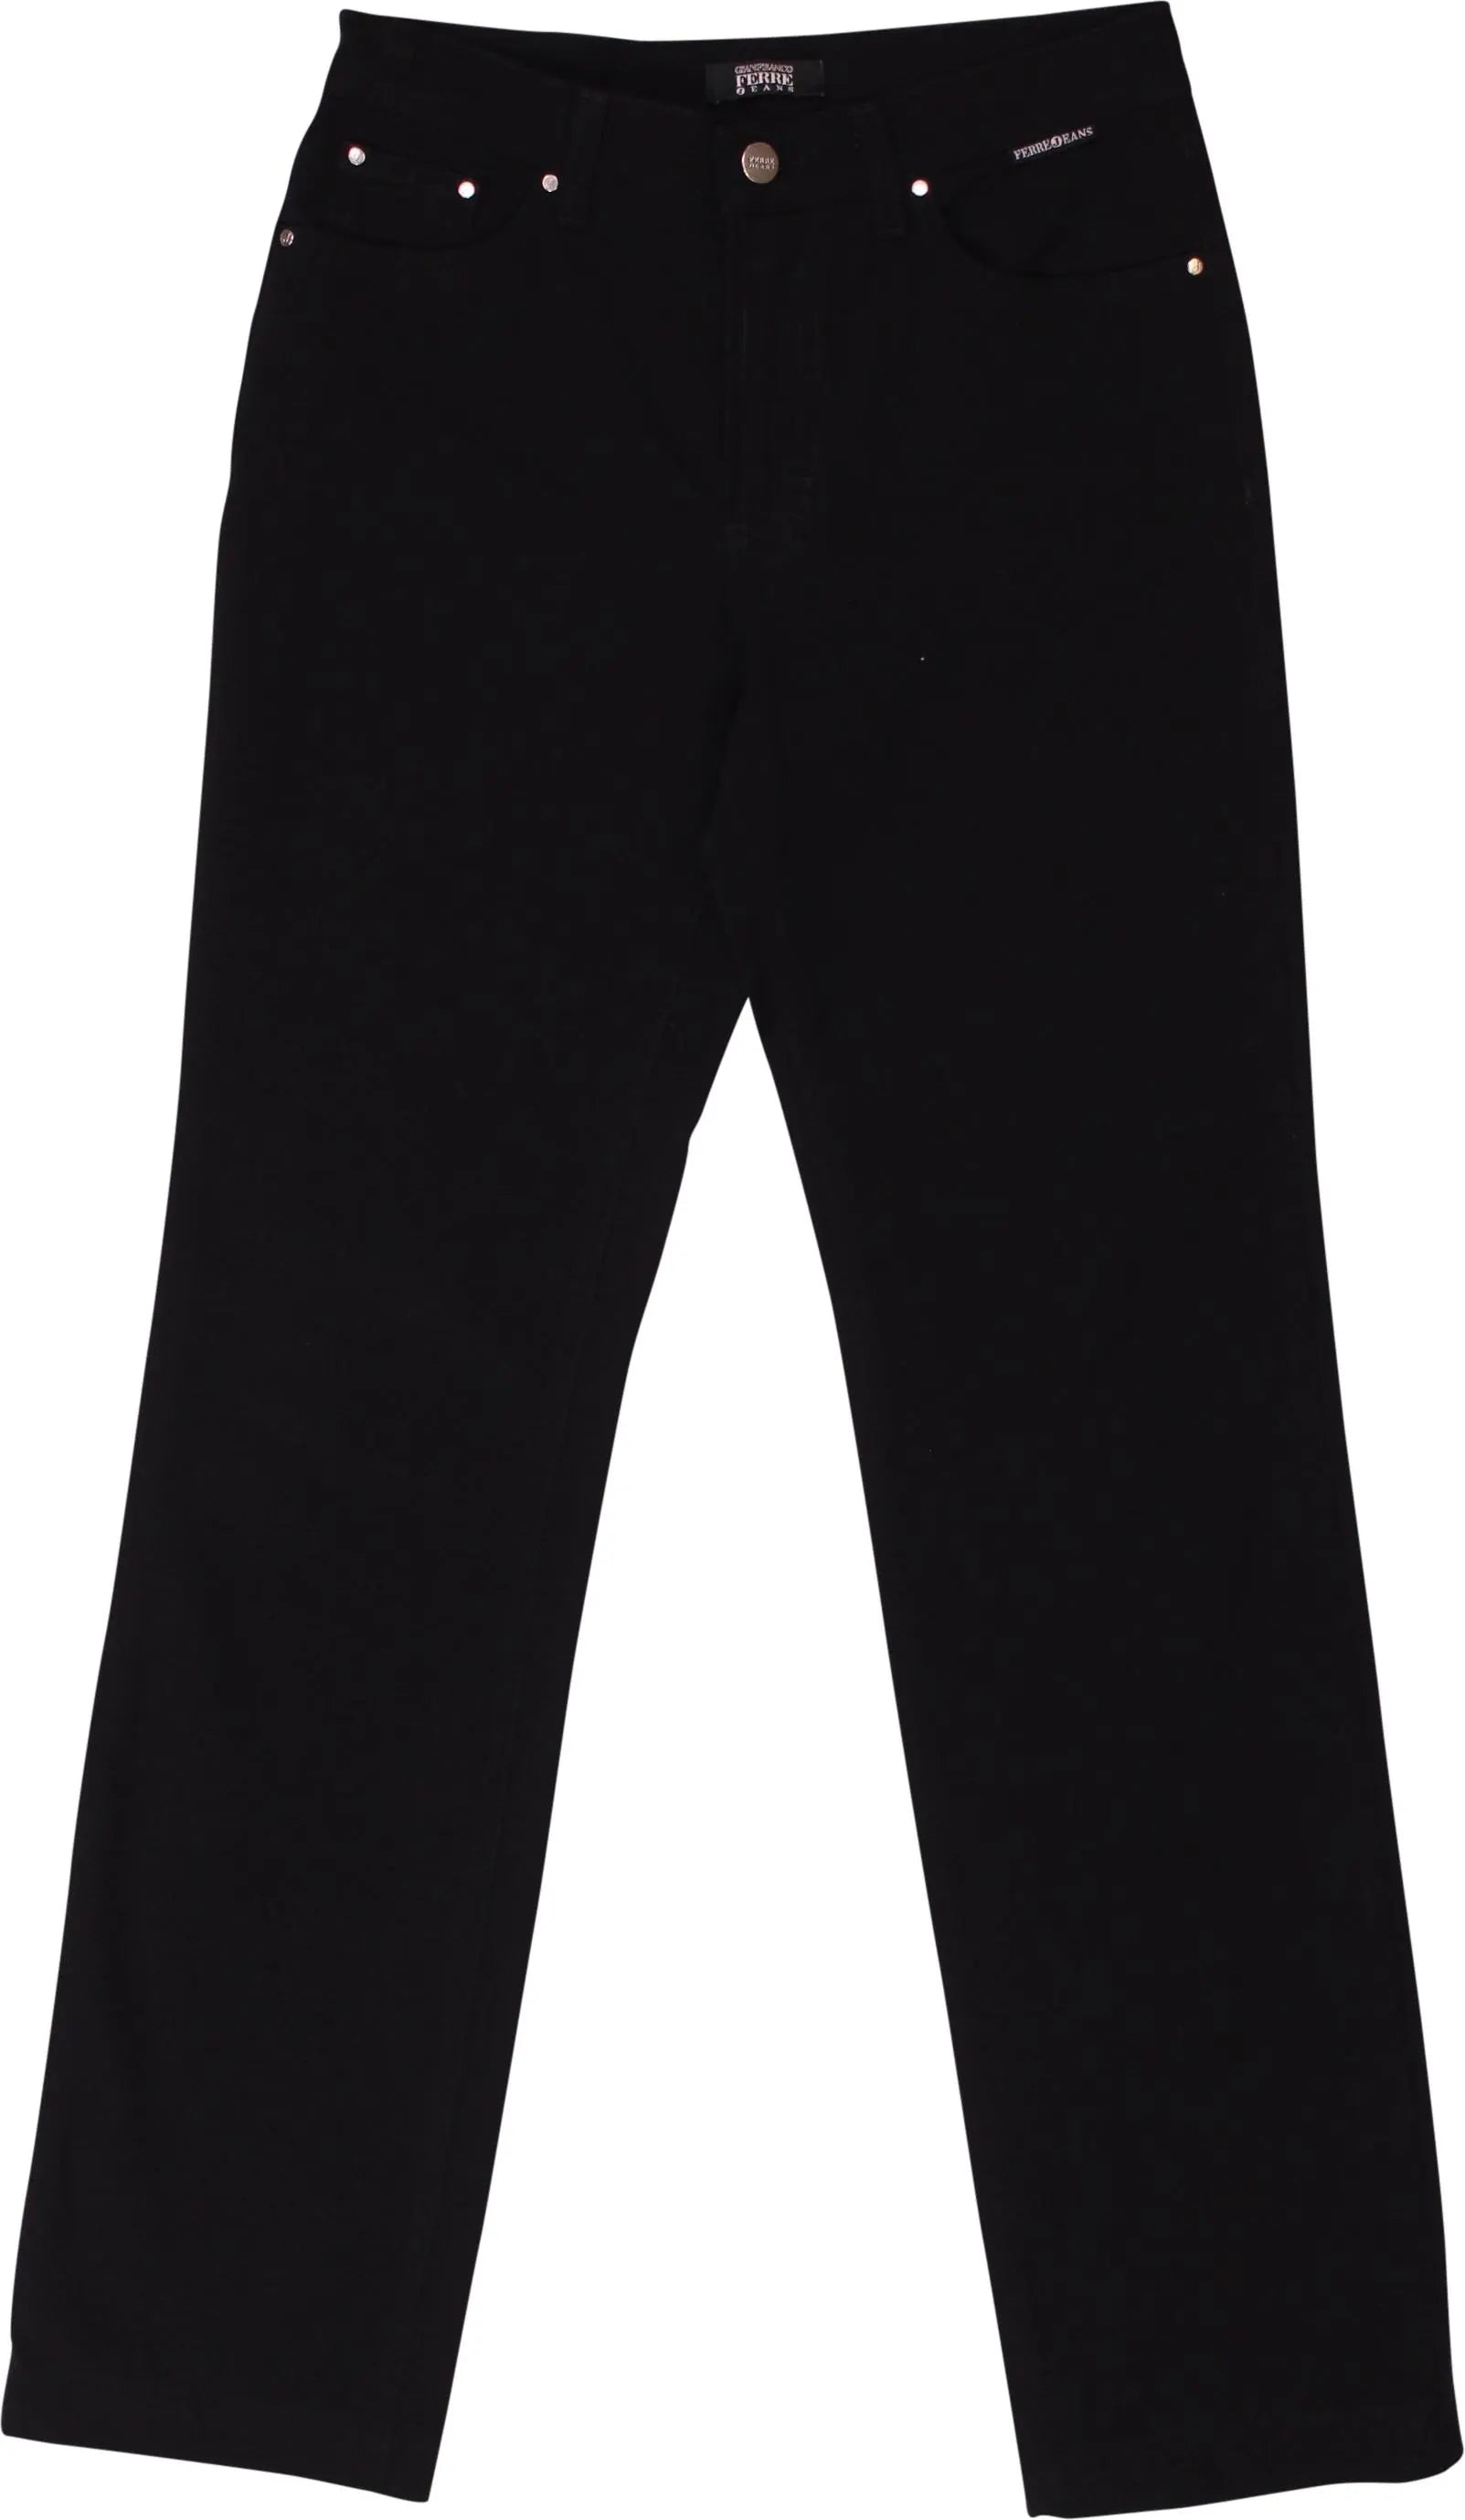 Gianfranco Ferre - Black Pants by Gianfranco Ferre- ThriftTale.com - Vintage and second handclothing